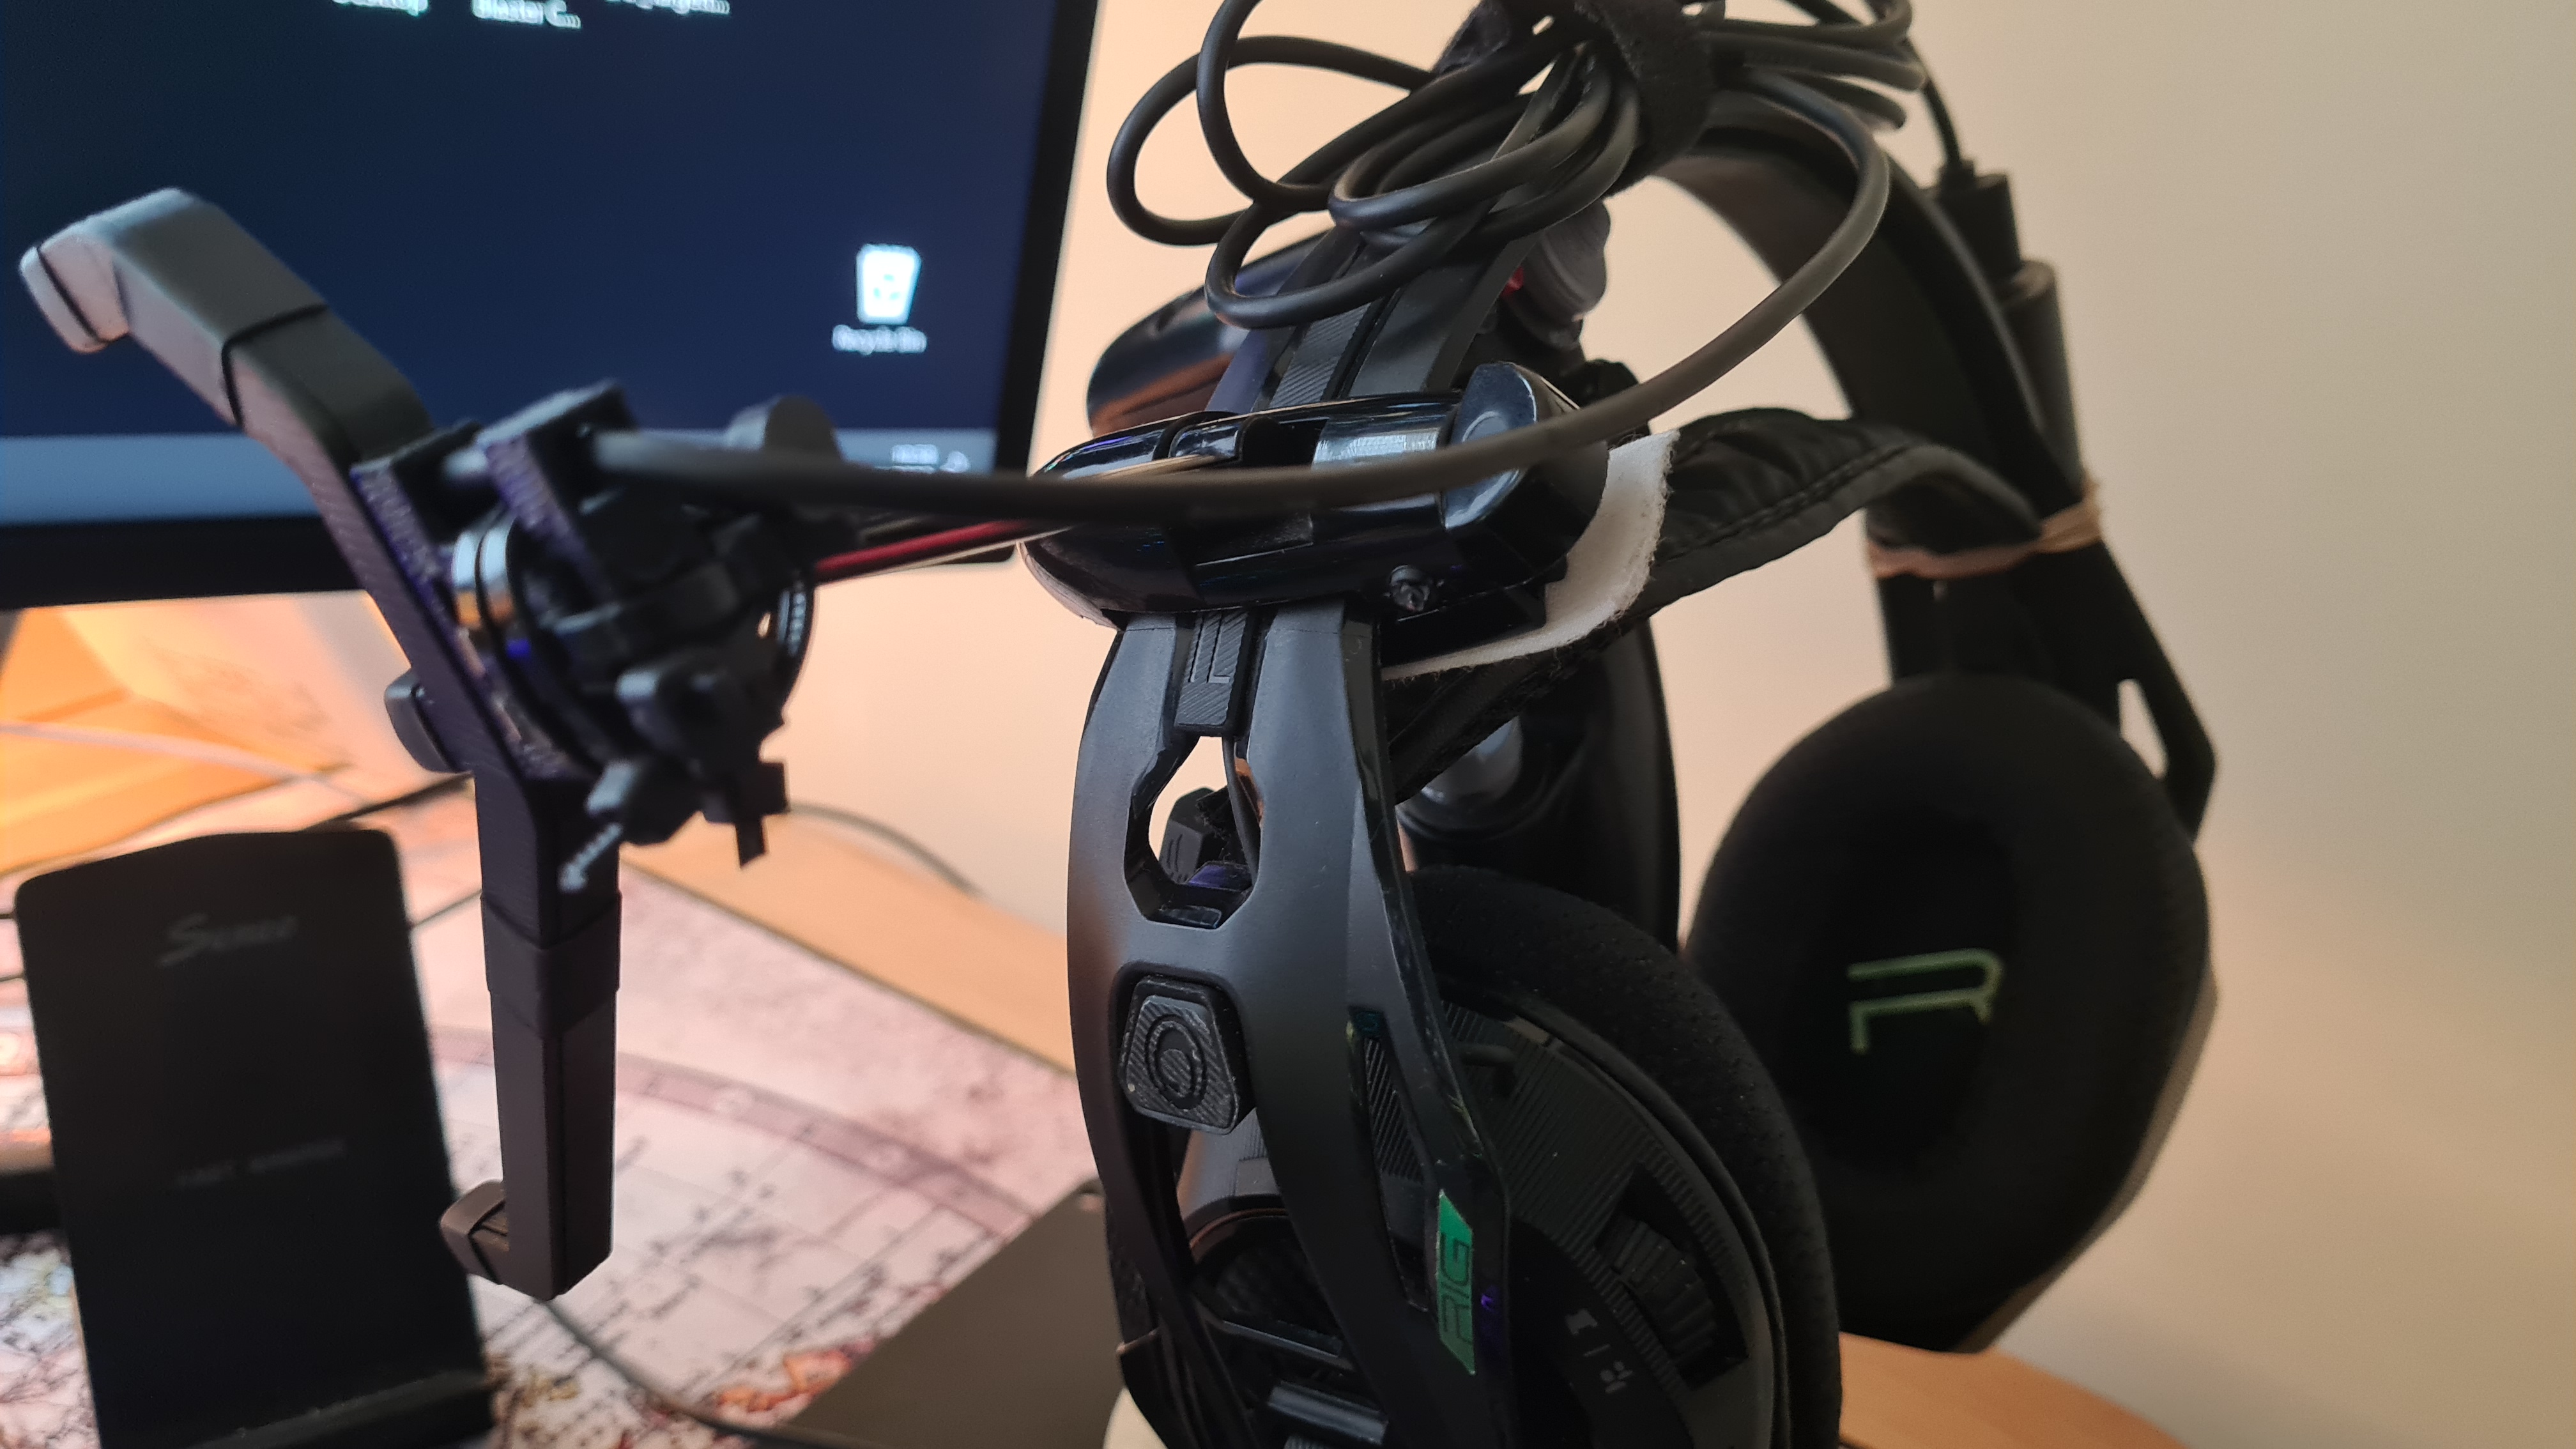 Alternative to TrackIR - SWC Products USB Head Clip (V4) UK - PC Hardware  and Related Software - ED Forums